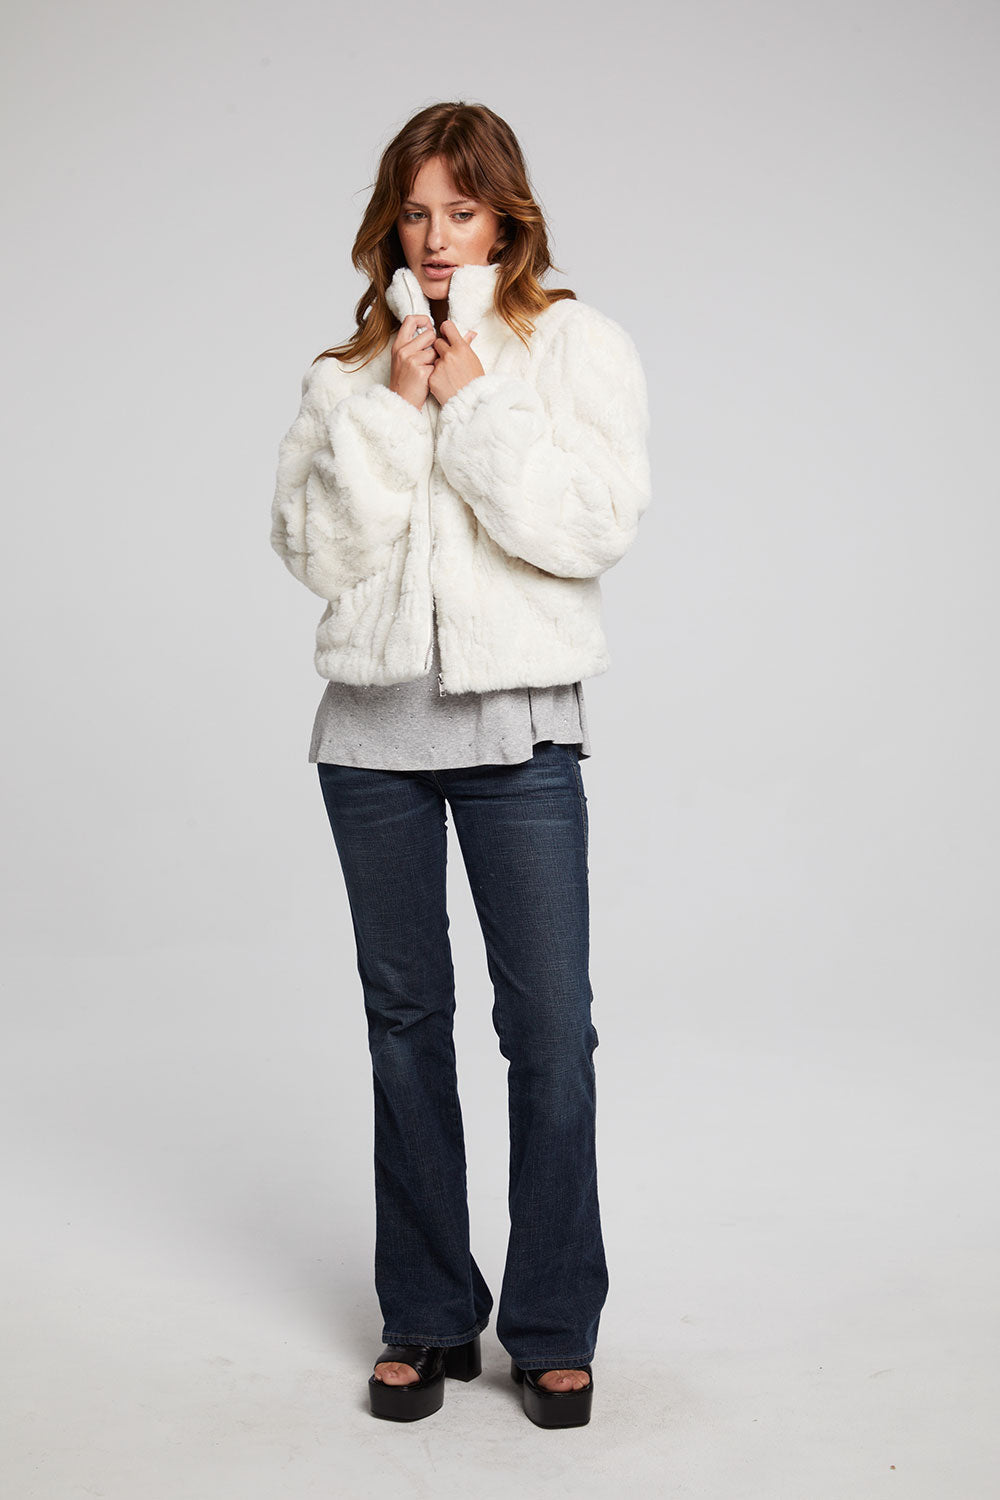 chaser-starry-white-faux-fur-jacket-08